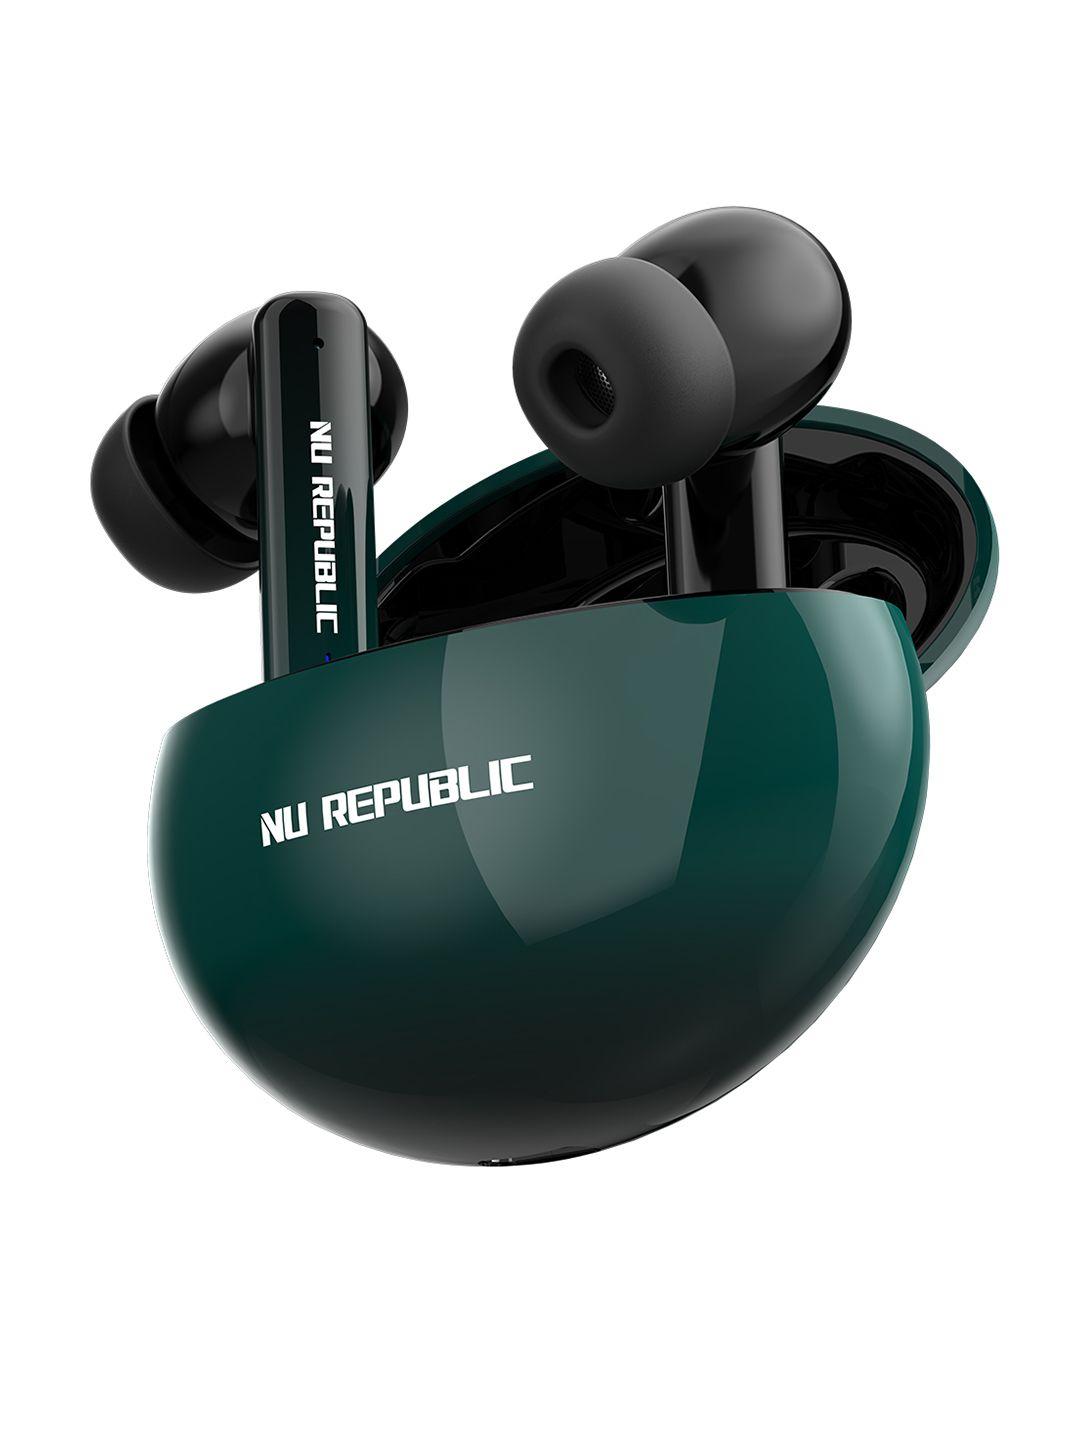 nu republic epic anc earbuds with upto 64 hrs playtime anc + enc quad mic